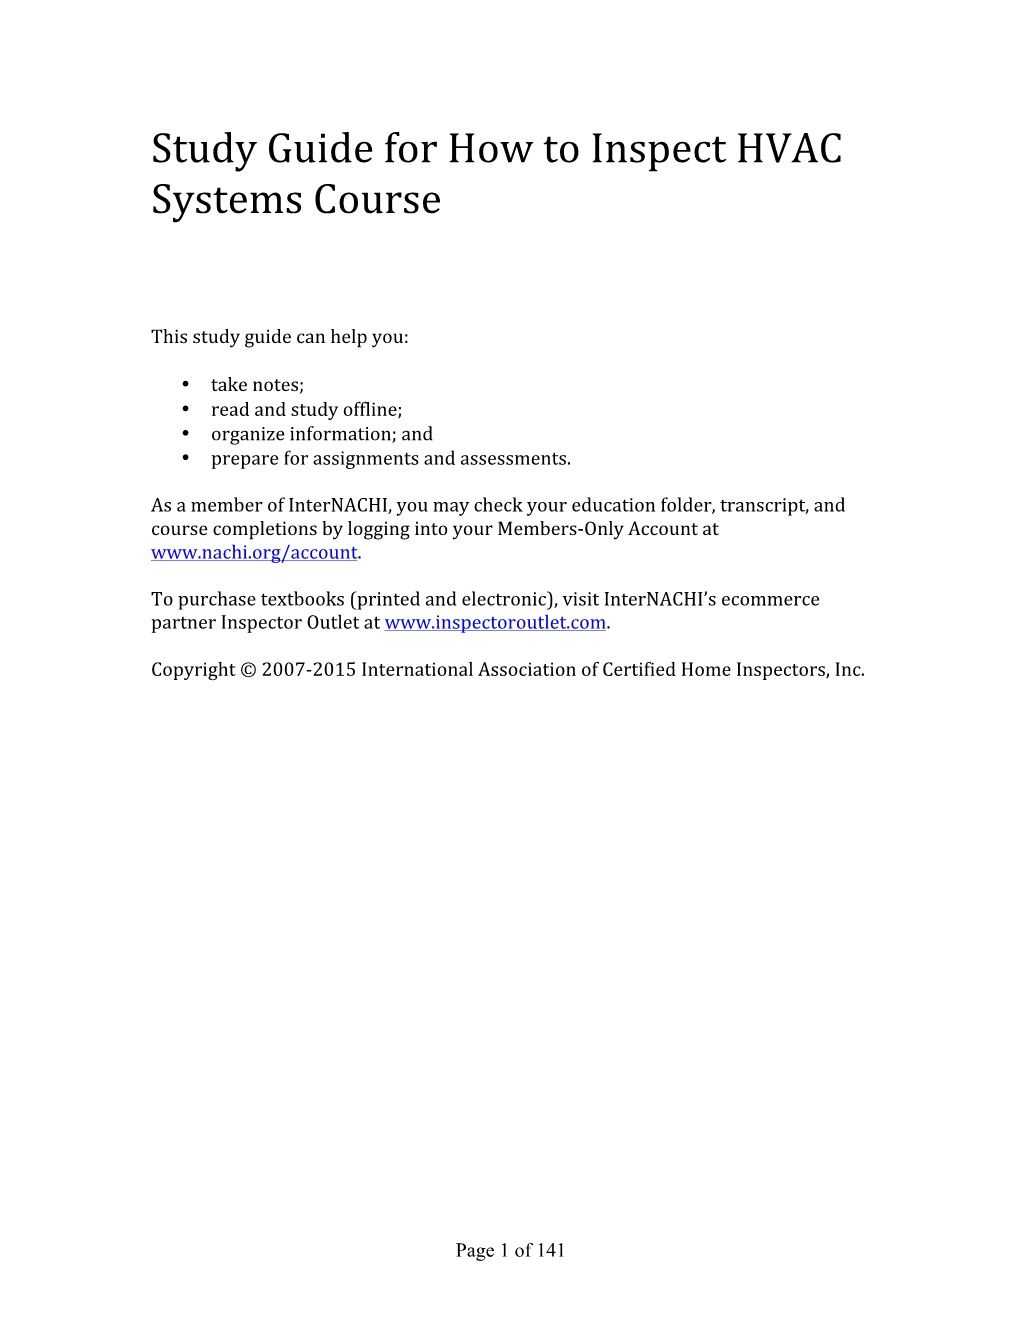 Study Guide for How to Inspect HVAC Systems Course